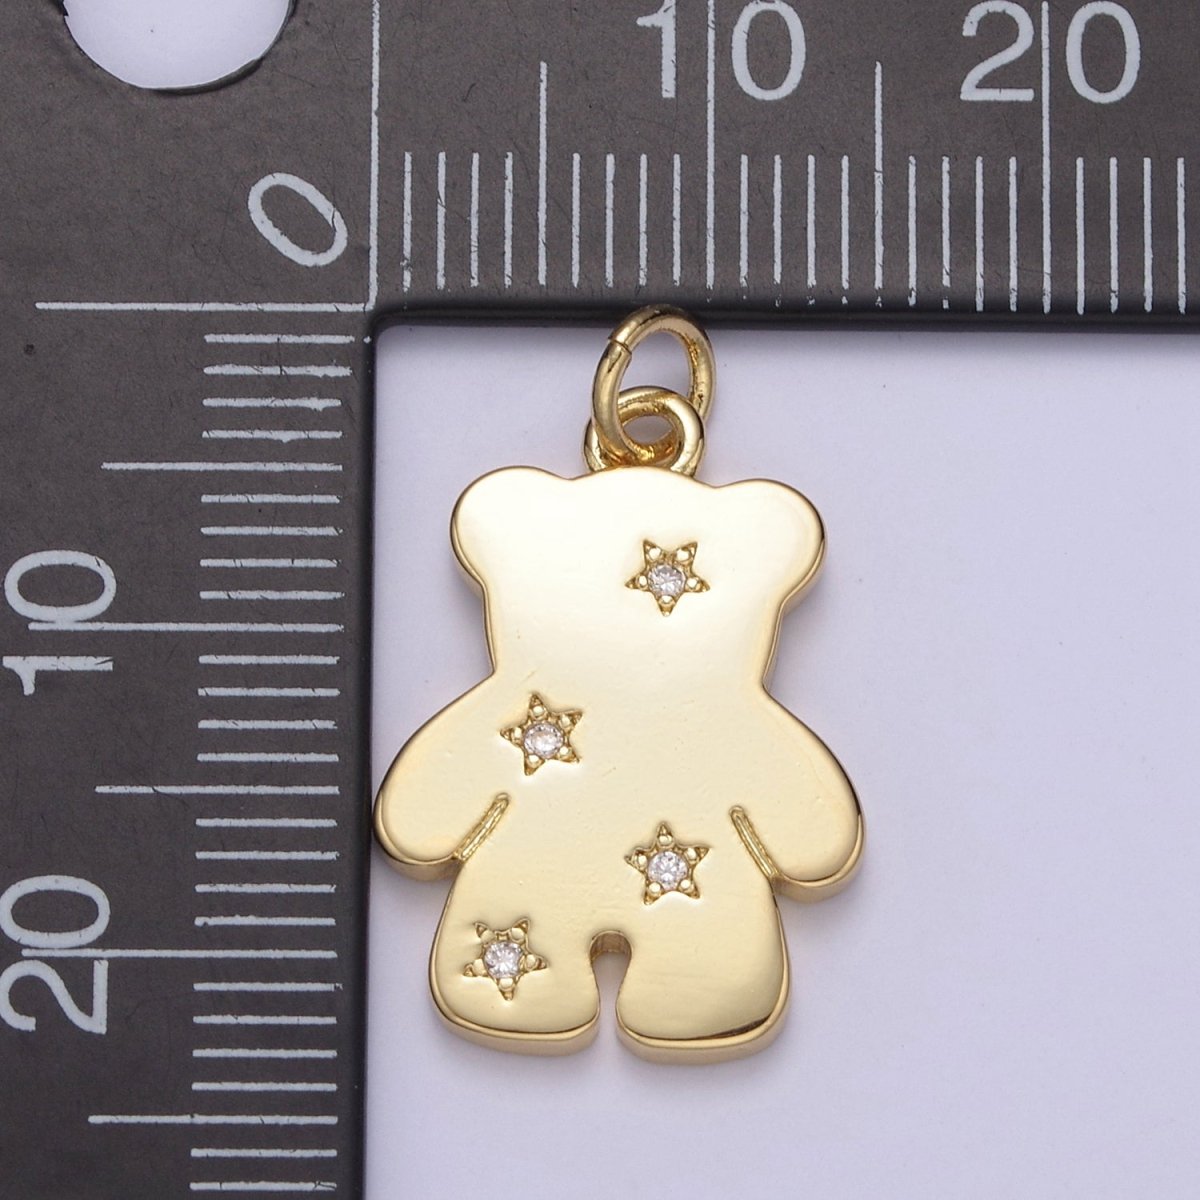 14k Gold Filled Teddy Bear Charm with Micro Pave Animal Charm for Kids Jewelry Necklace Bracelet N-688 - DLUXCA